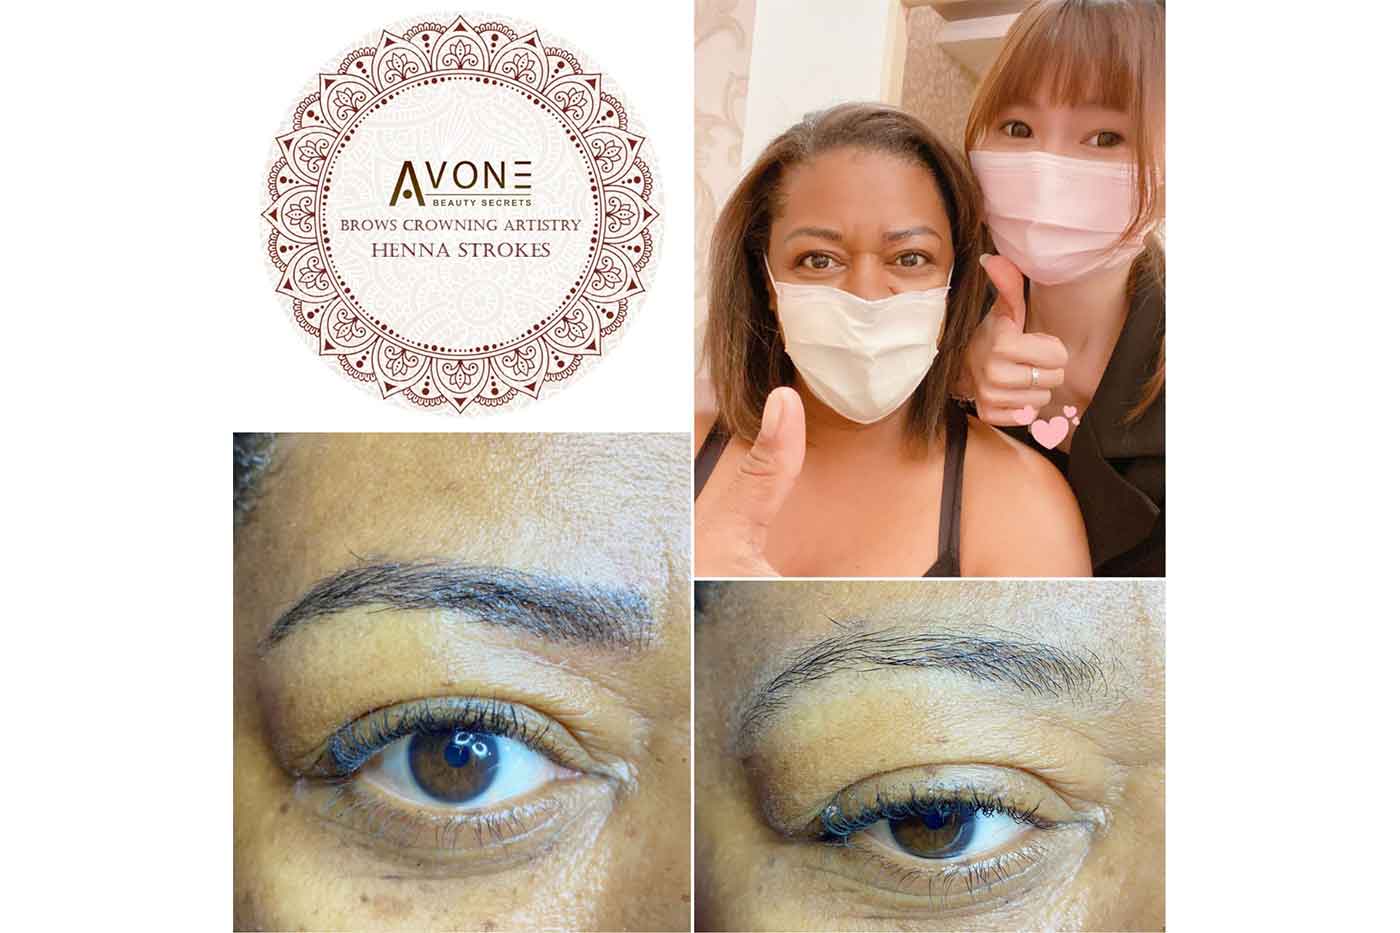 Avone Beauty Secrets Creates Henna Brows Crowning Artistry Technique